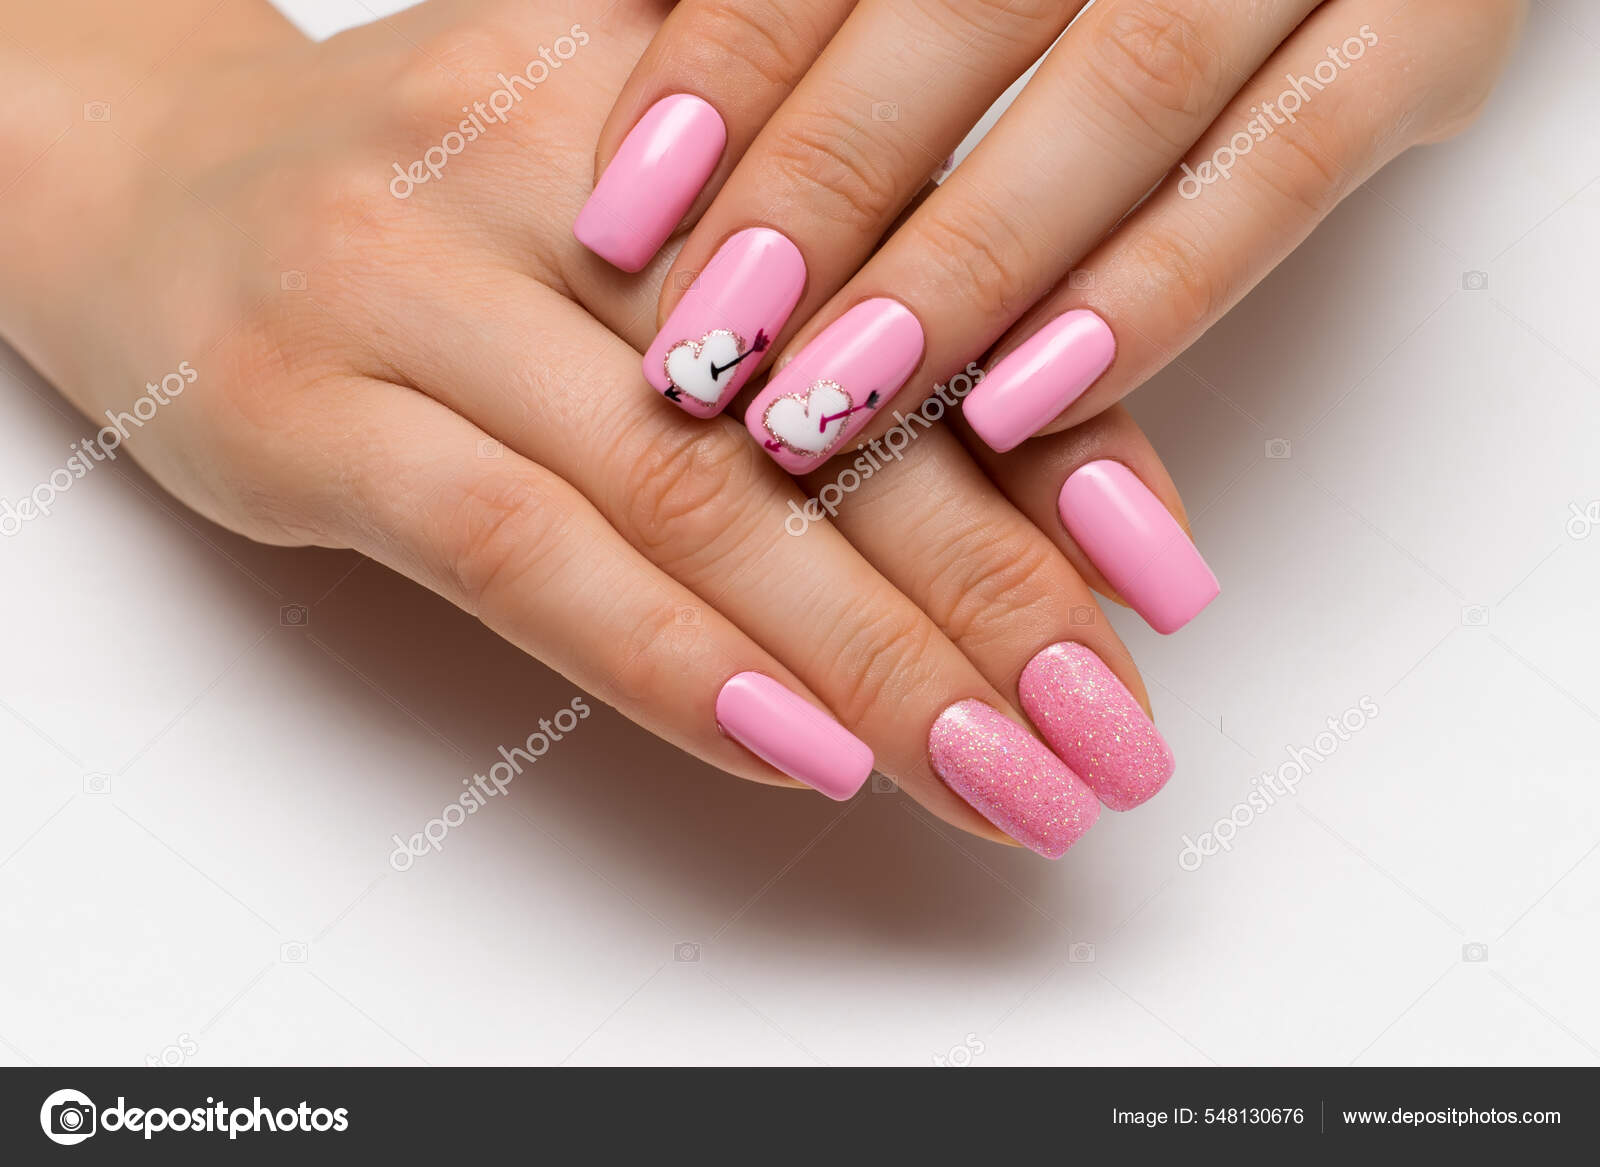 15 Pink Nail Art Ideas and Designs- Cute Pink Manicure Ideas